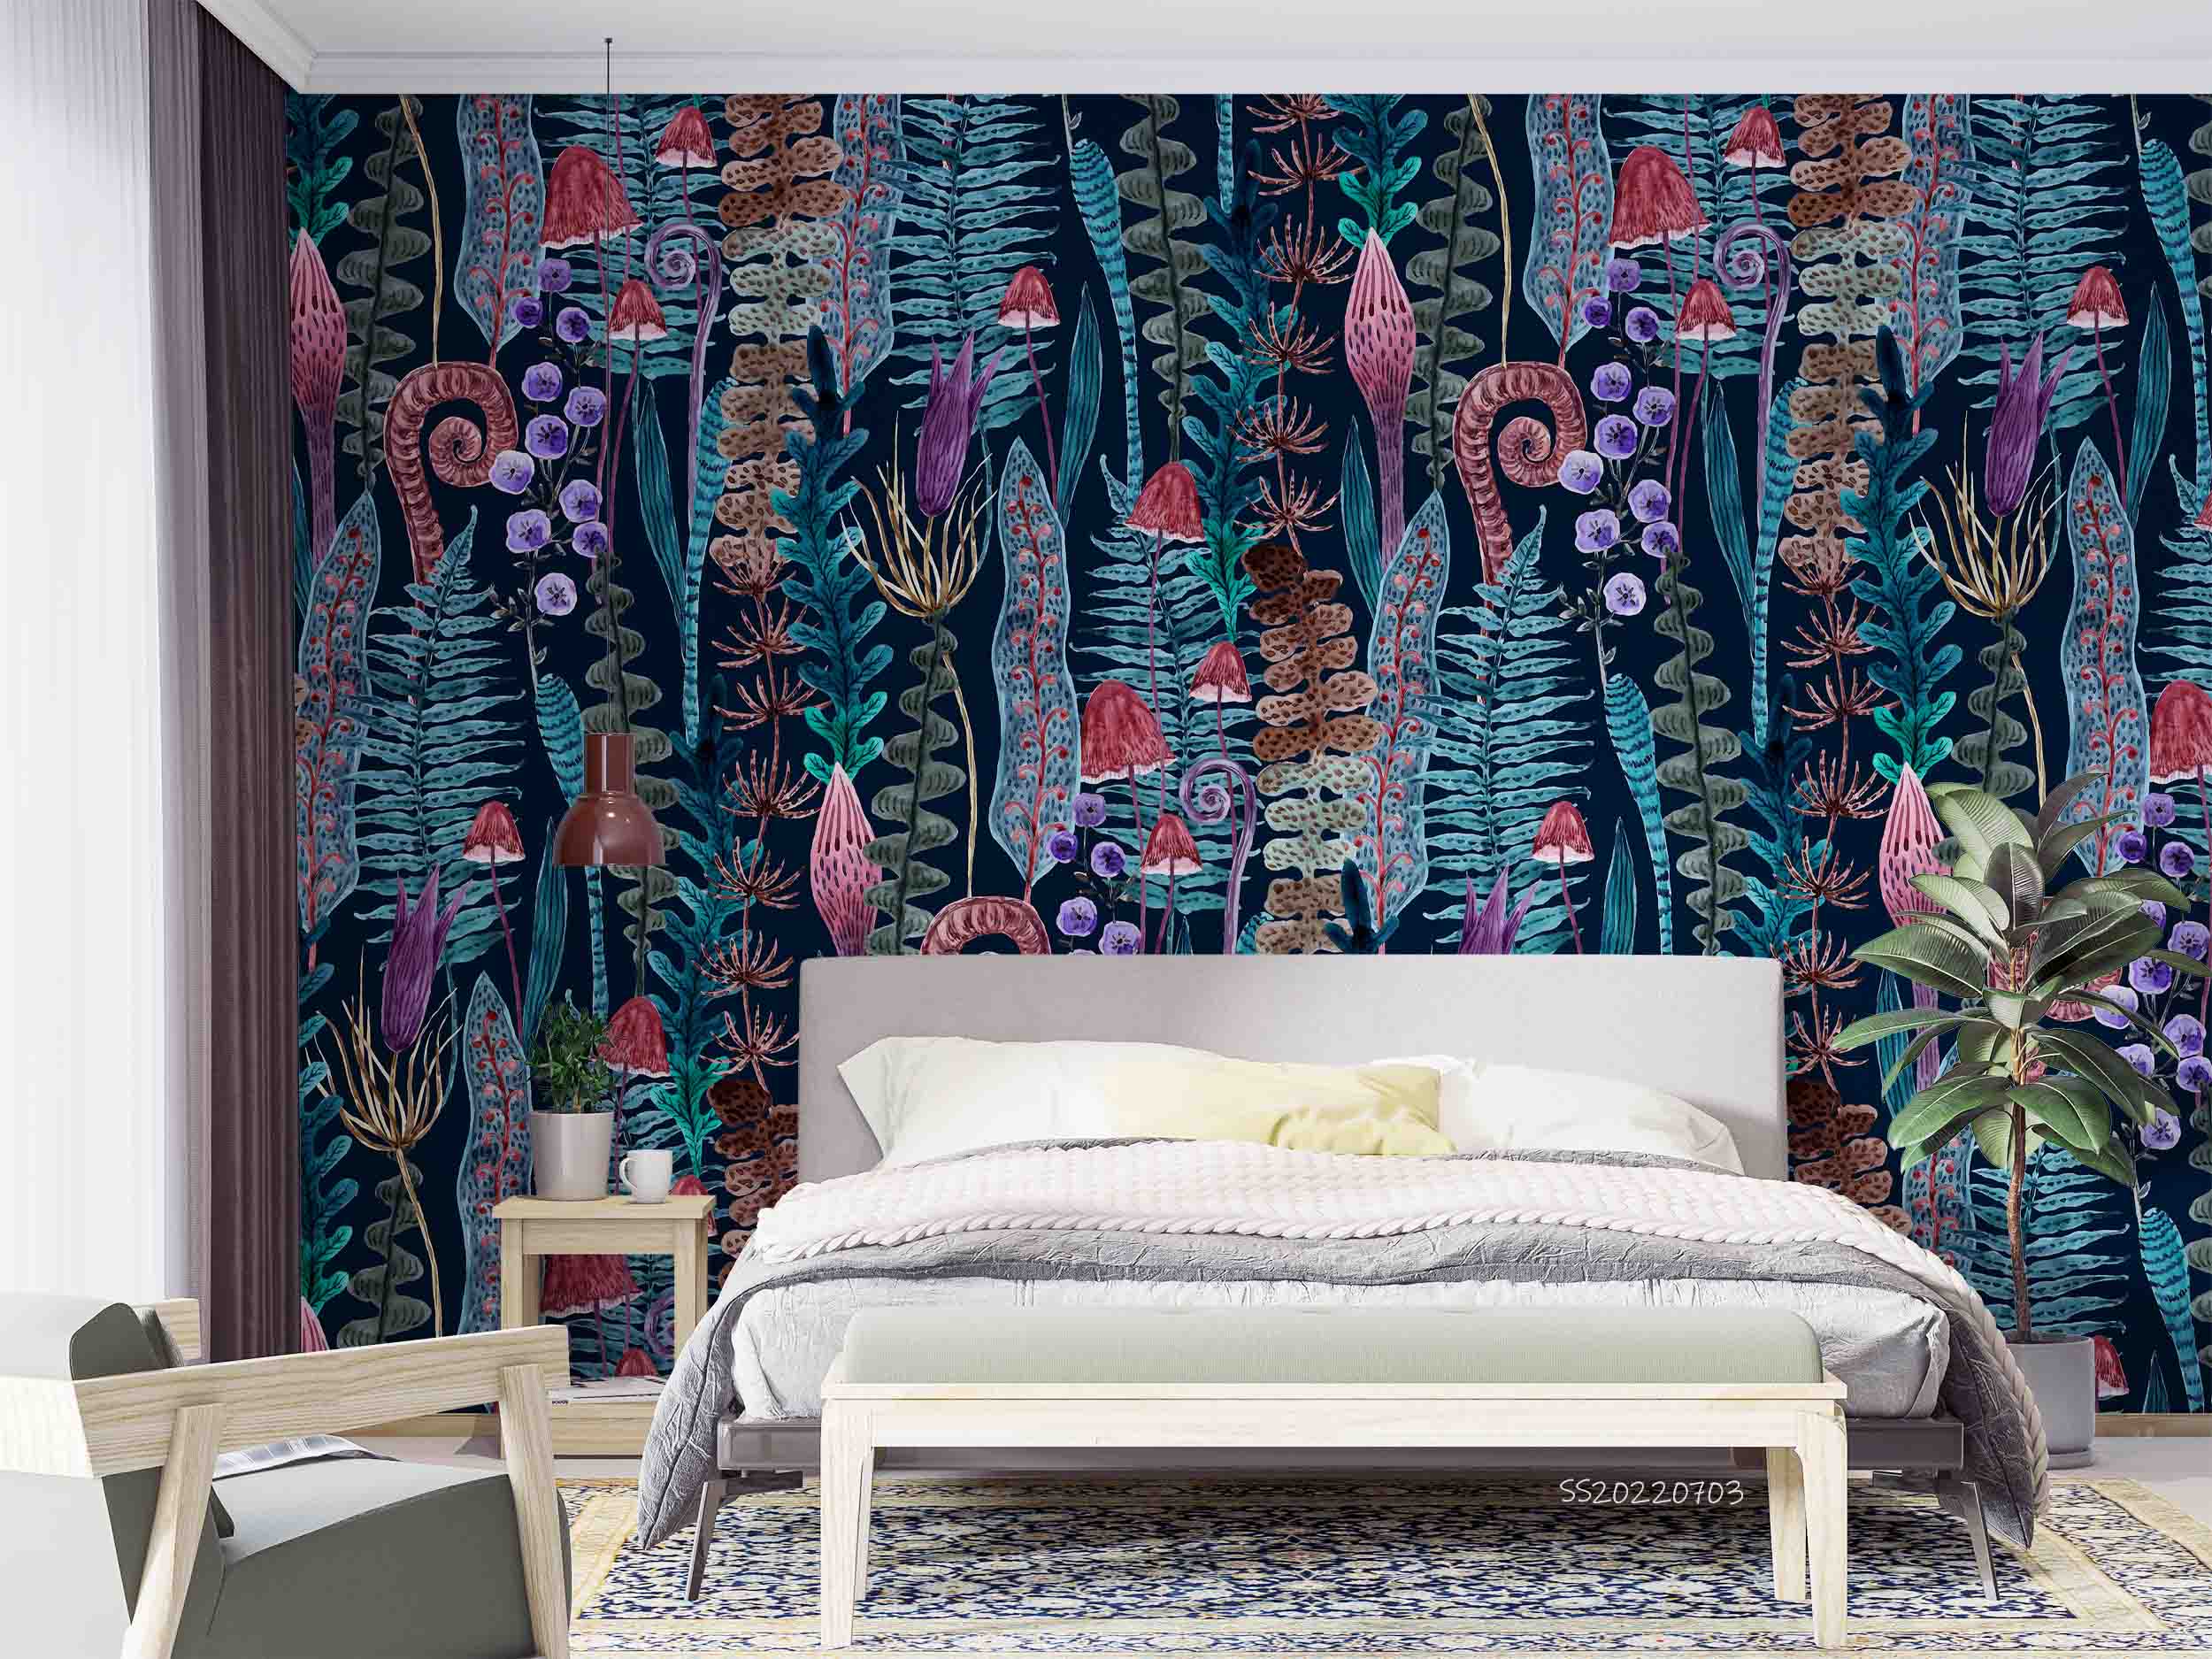 3D Vintage Abstract Plant Leaves Floral Wall Mural Wallpaper GD 1050- Jess Art Decoration